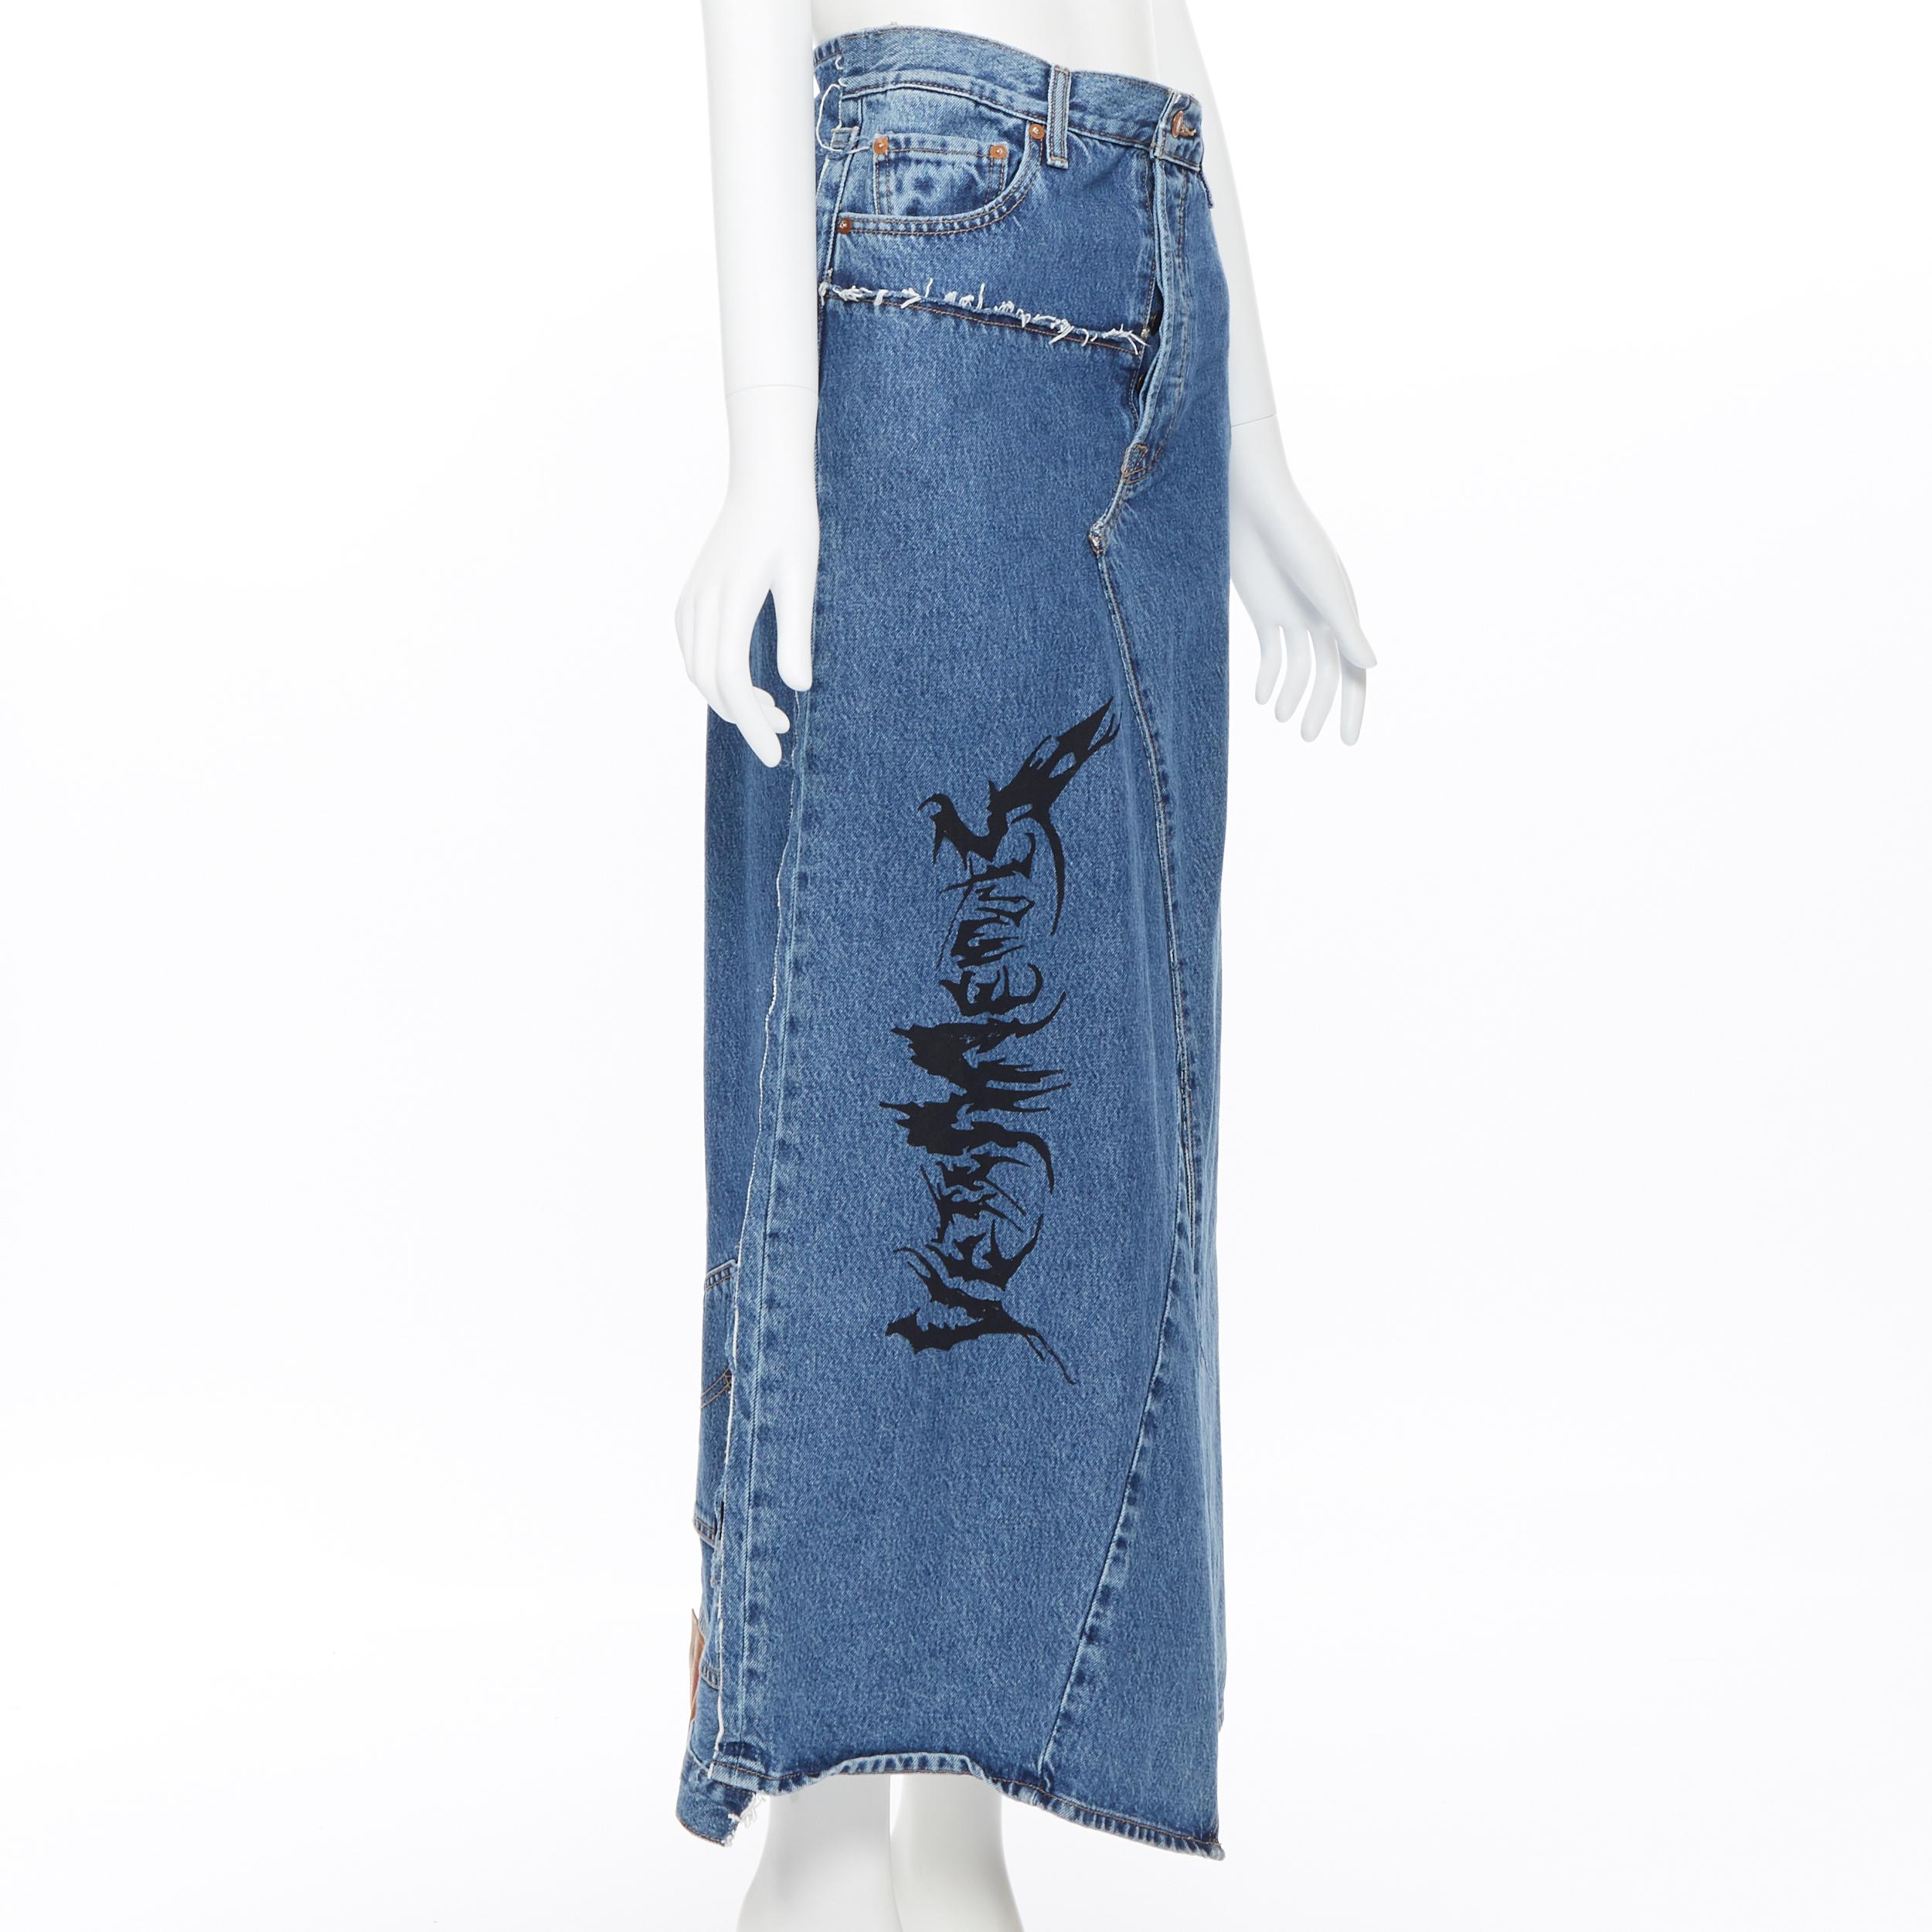 new VETEMENTS AW19 punk logo print deconstructed Levi's patchwork skirt XS Reference: TGAS/A04877 
Brand: Vetements 
Designer: Demna Gvasalia 
Collection: Fall Winter 2019 Runway 
Material: Cotton 
Color: Blue 
Pattern: Solid 
Closure: Button 
Extra